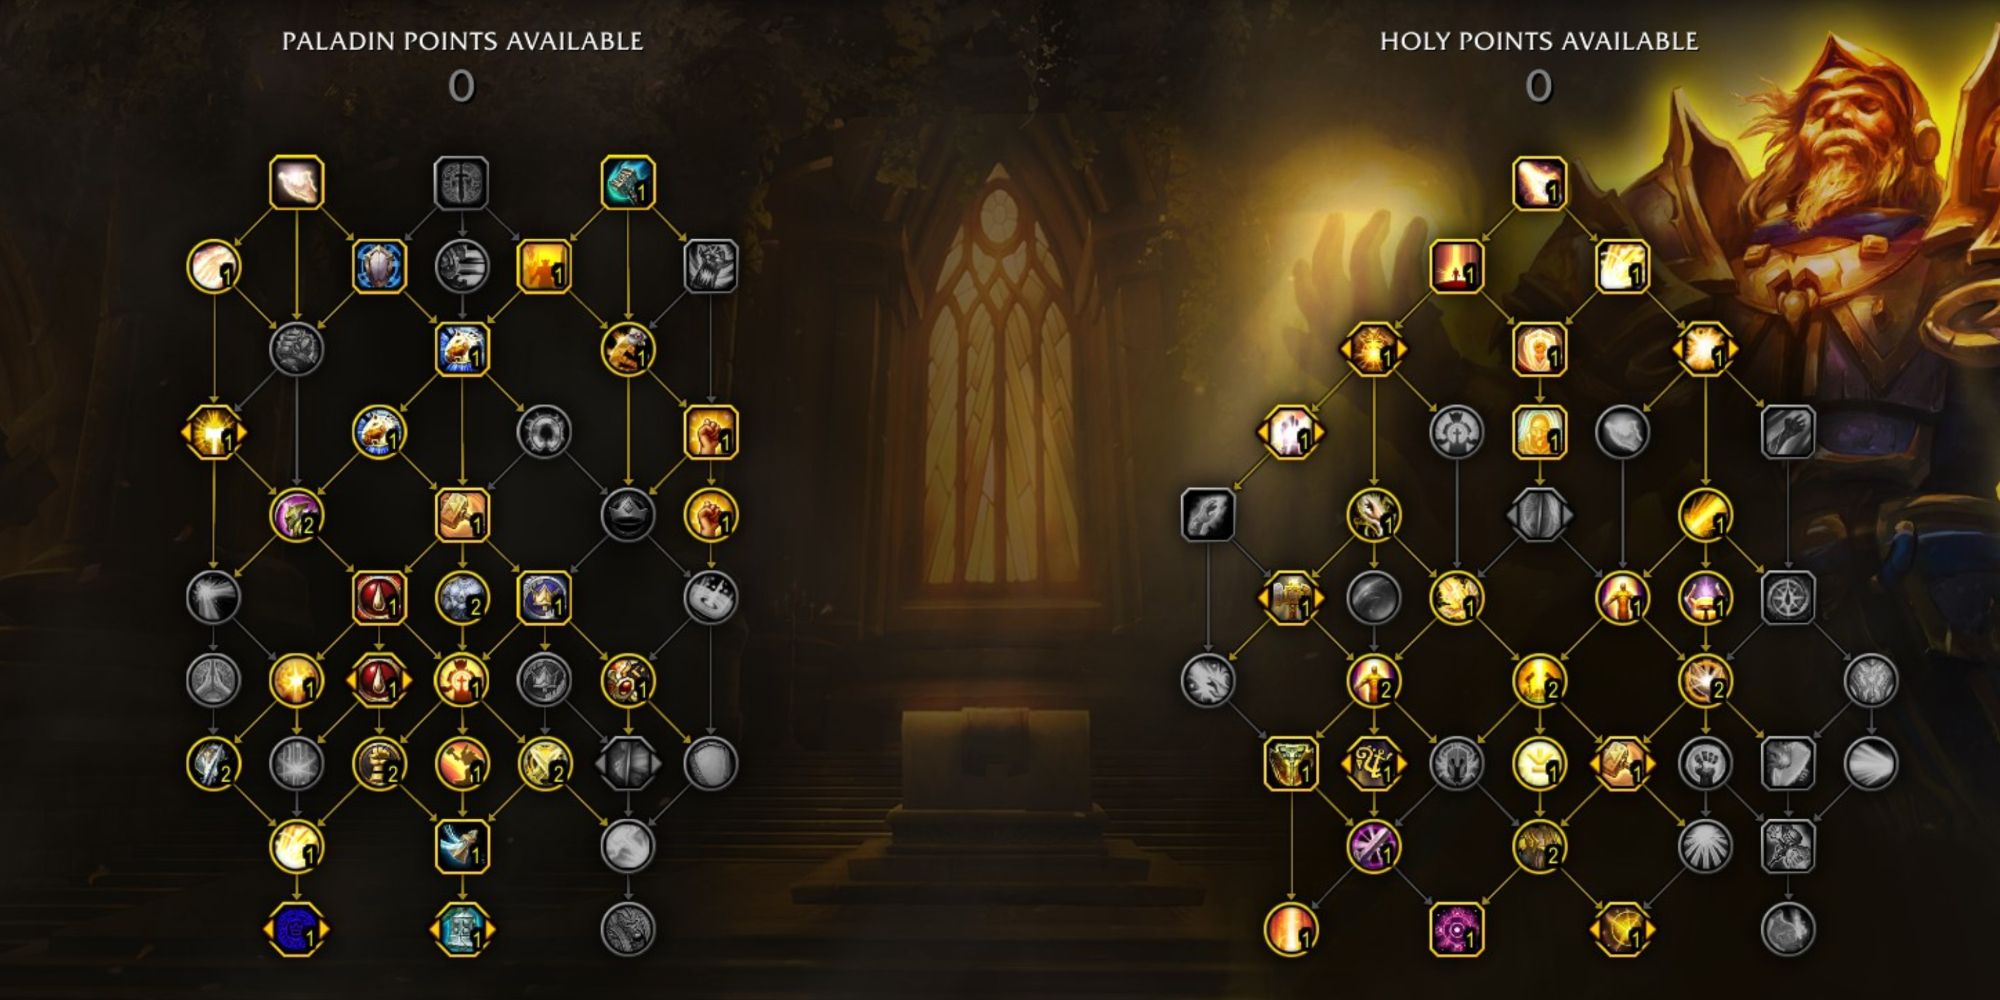 Holy Paladin Mythic Plus Build Talent Tree In Game In World Of Warcraft